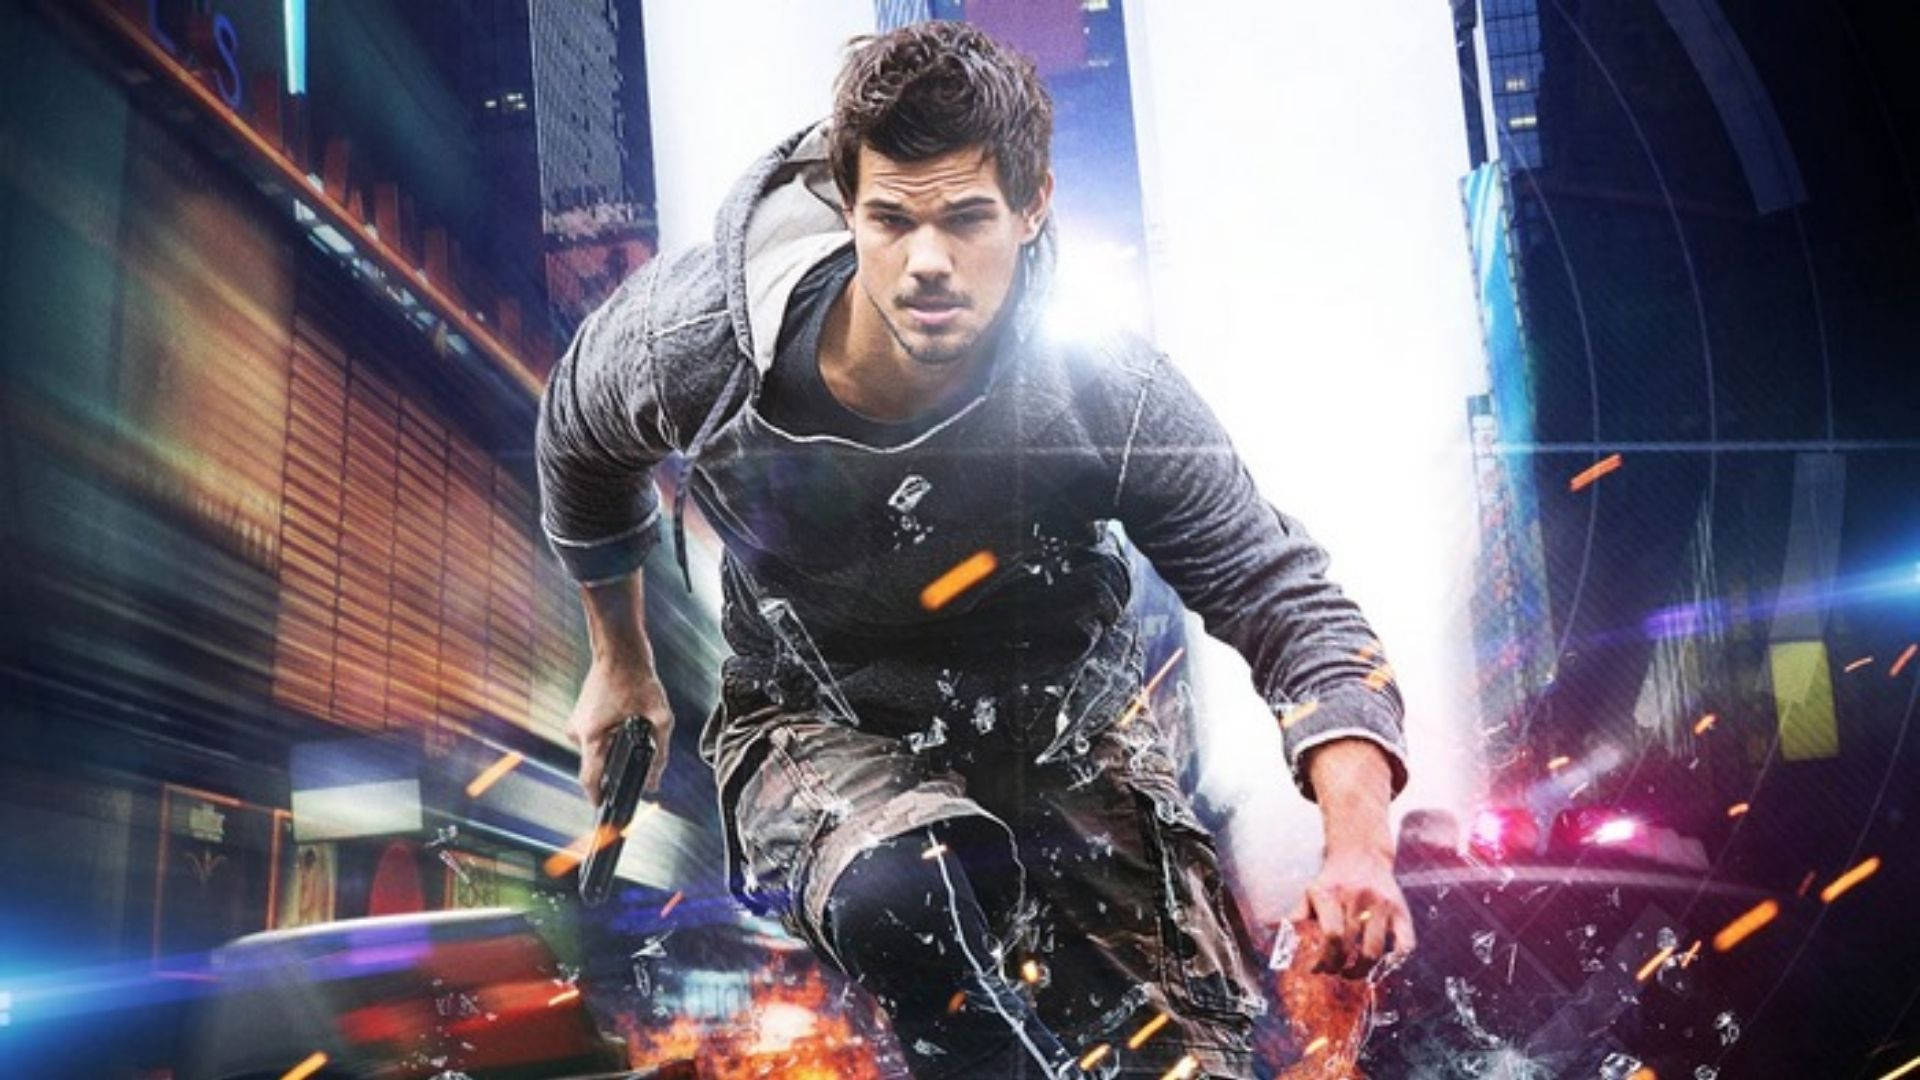 Taylor Lautner Caught In An Agile Moment Background